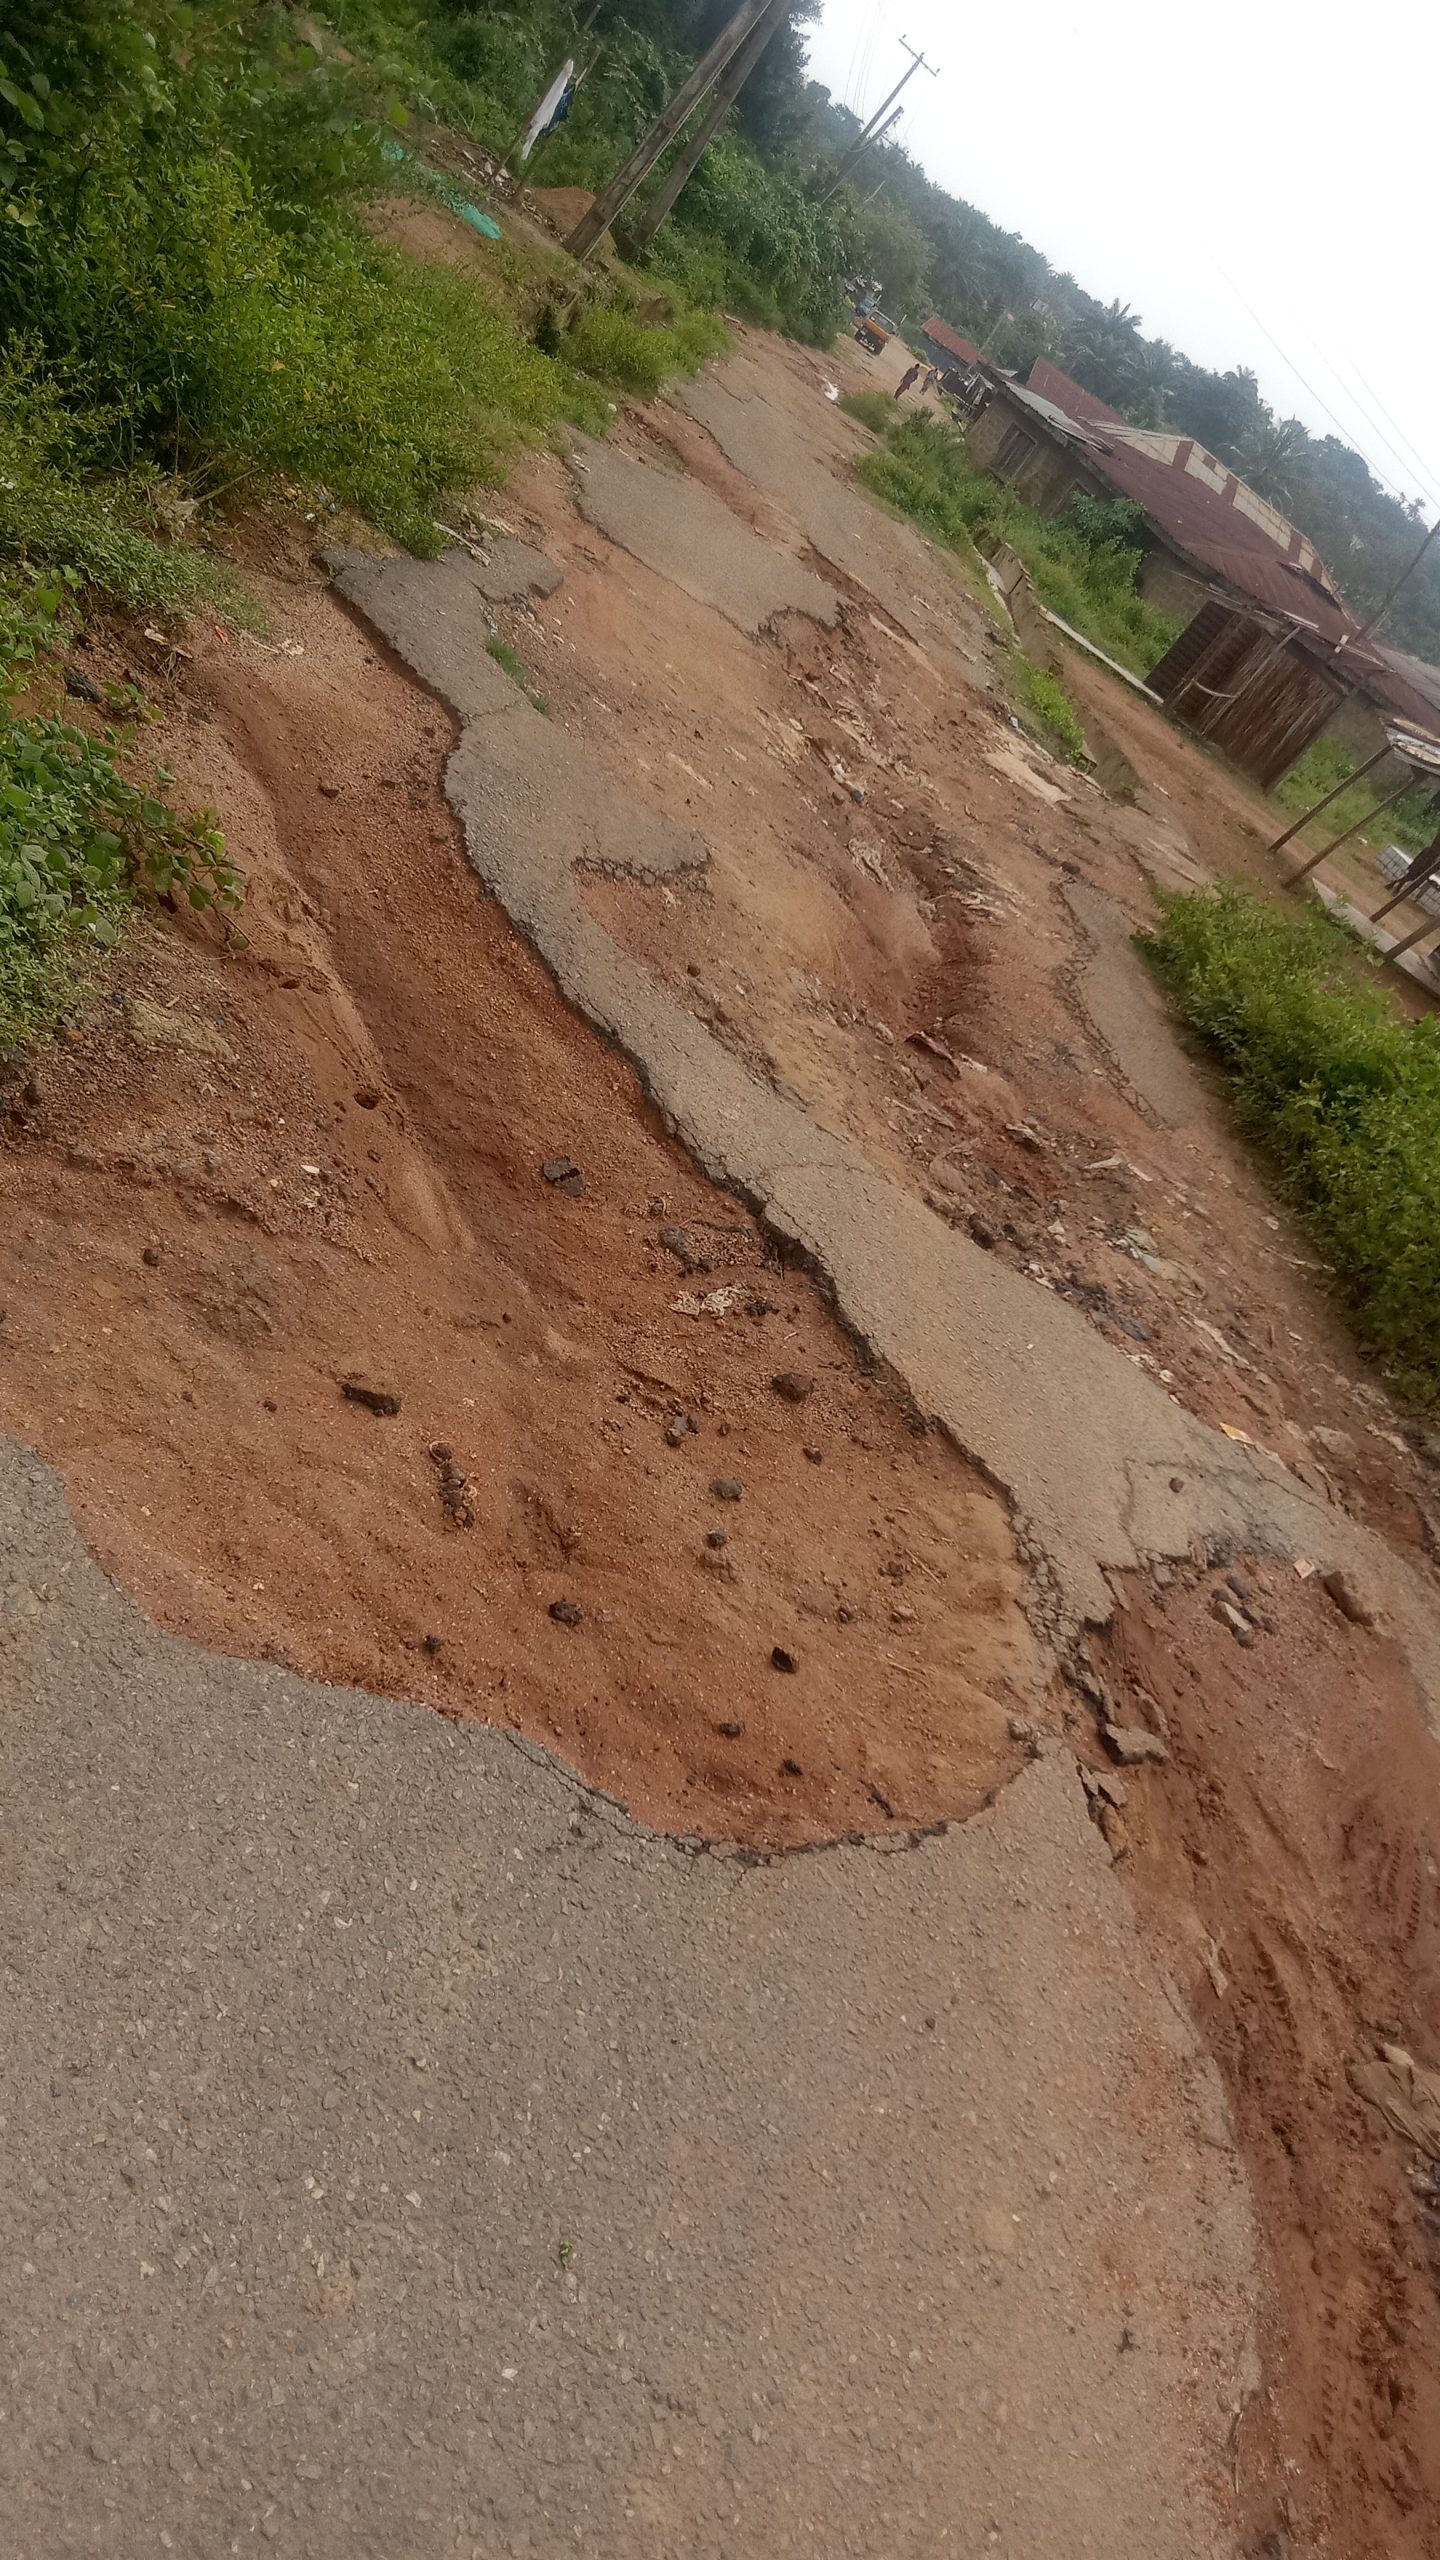 Special Report: How Bad Road is Affecting Business, Causing Accidents in Some Areas in Ada as Residents Lament of Poor Roads for Over 6 years